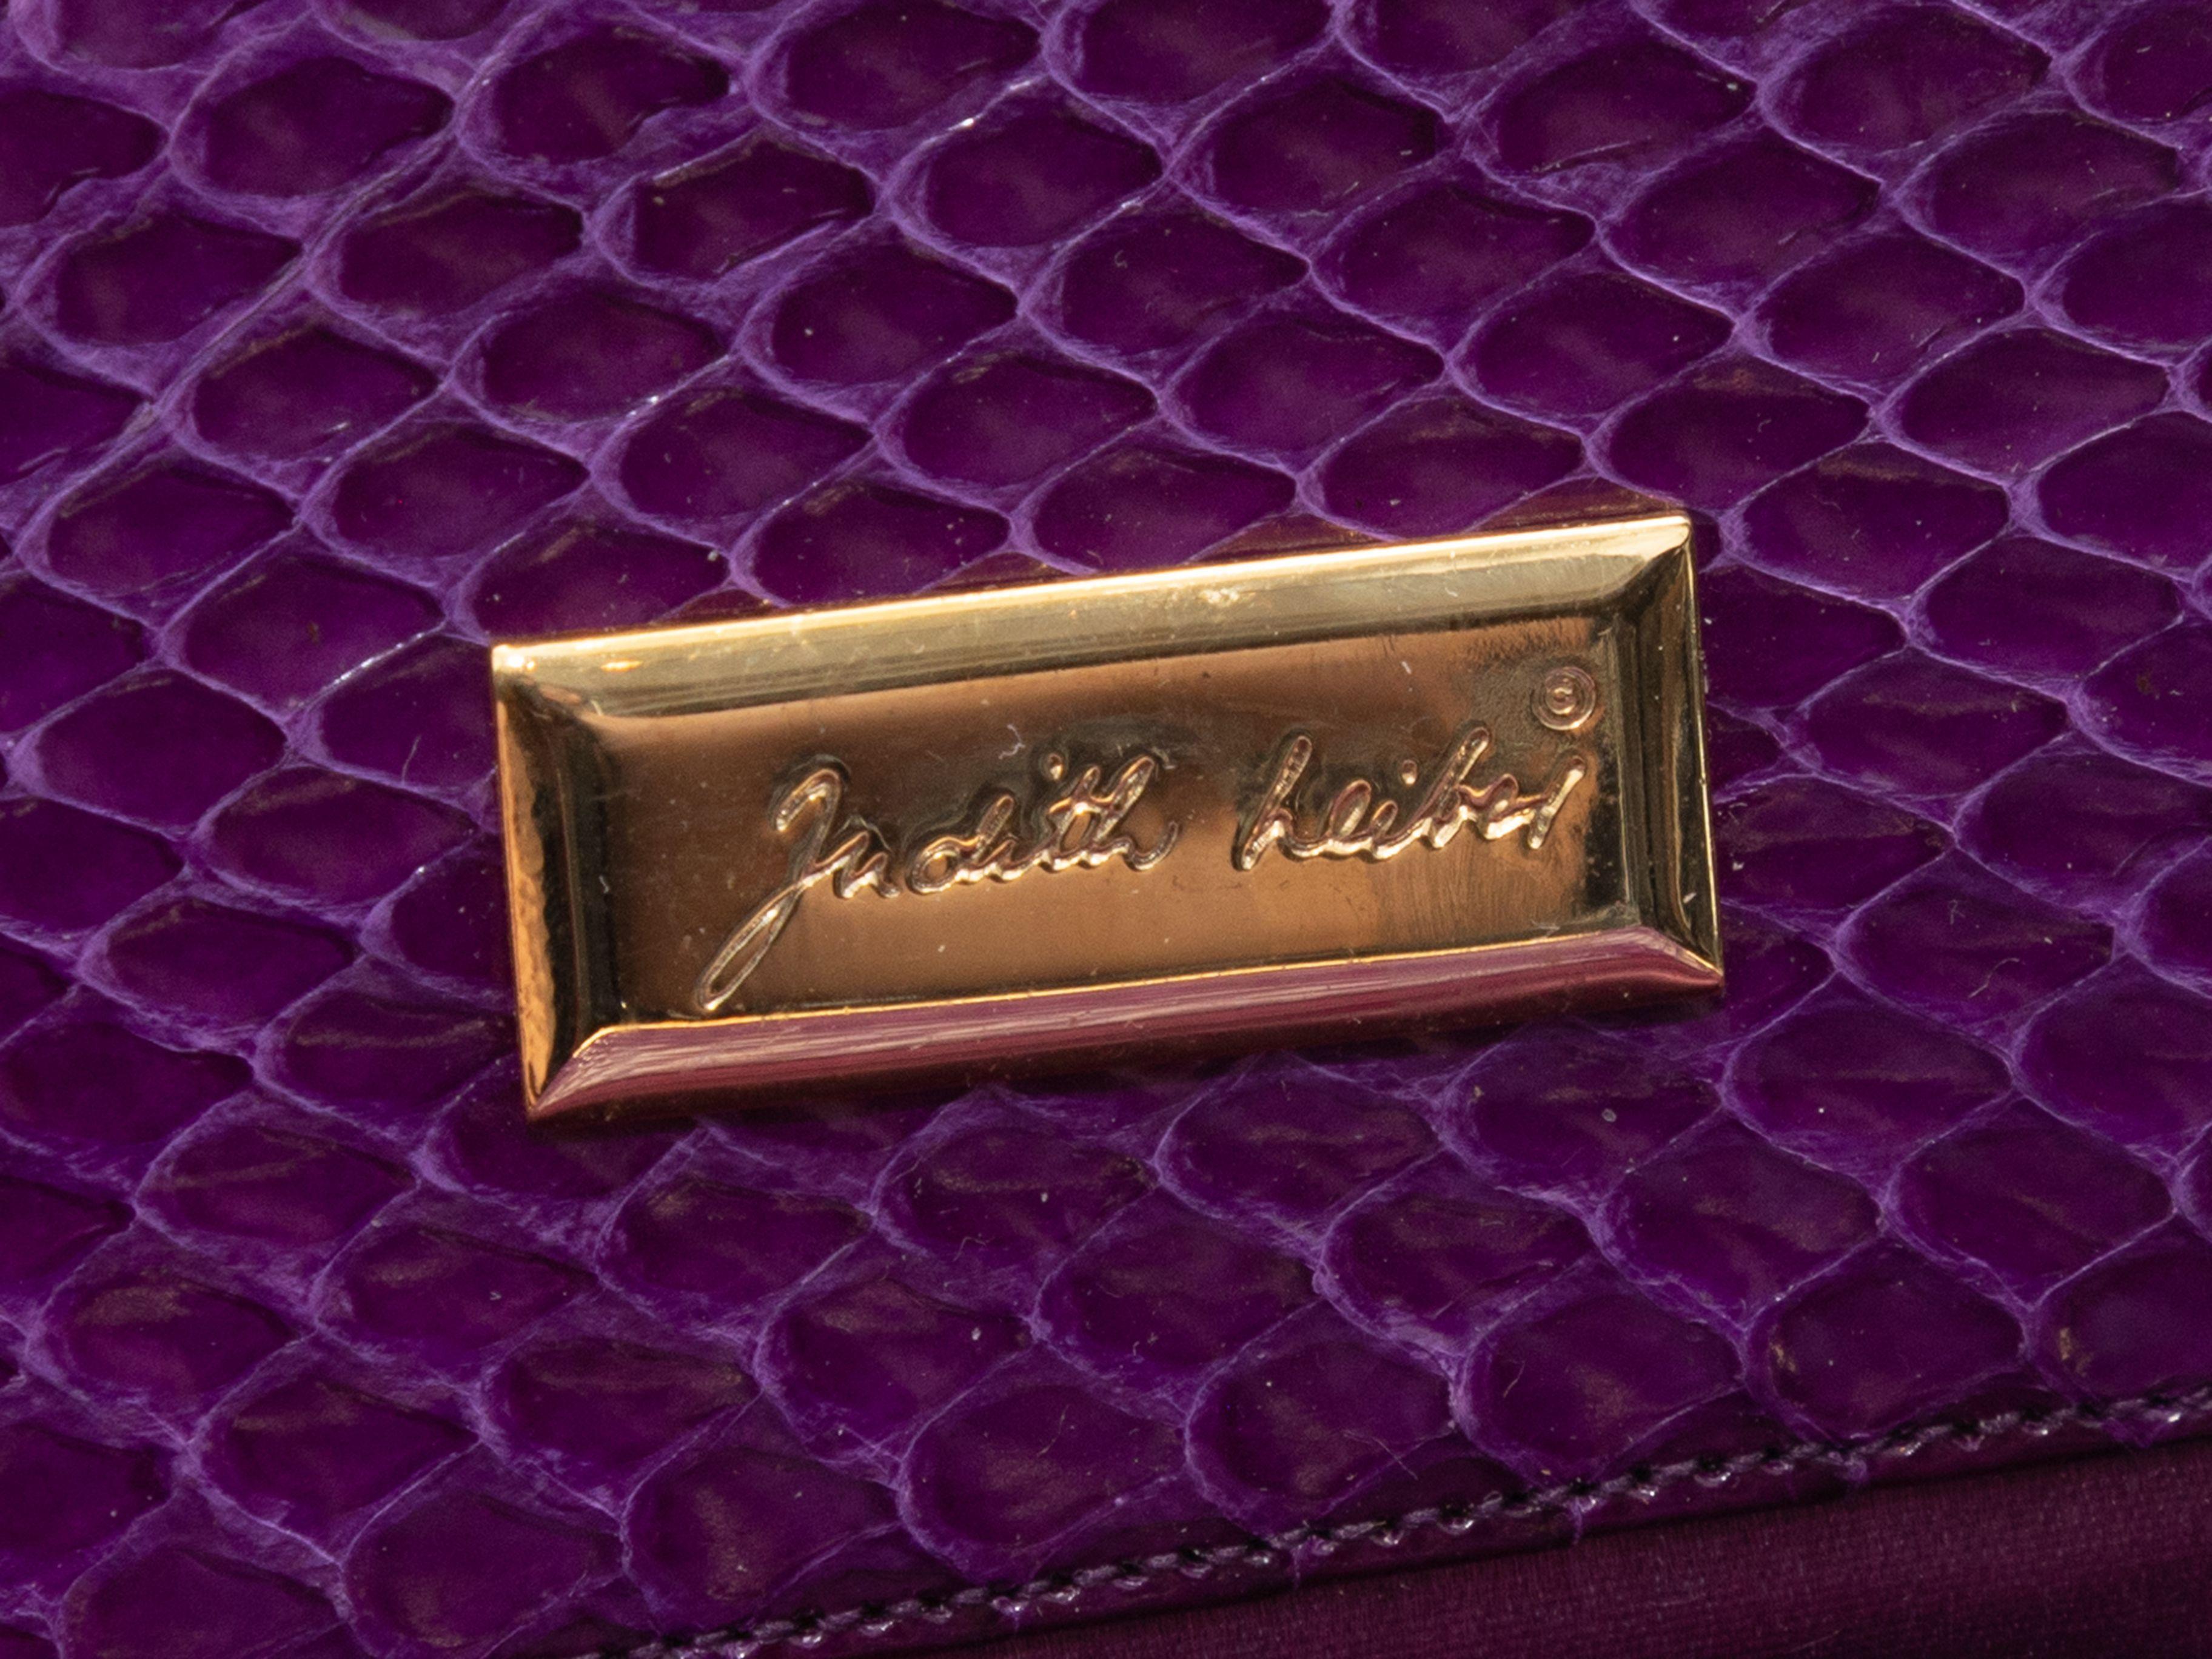 Product Details: Vintage Purple Judith Leiber Snakeskin Frame Clutch. This clutch features a snakeskin body, gold-tone hardware, purple satin interior, an optional shoulder strap, and a top cabochon clasp closure. 11